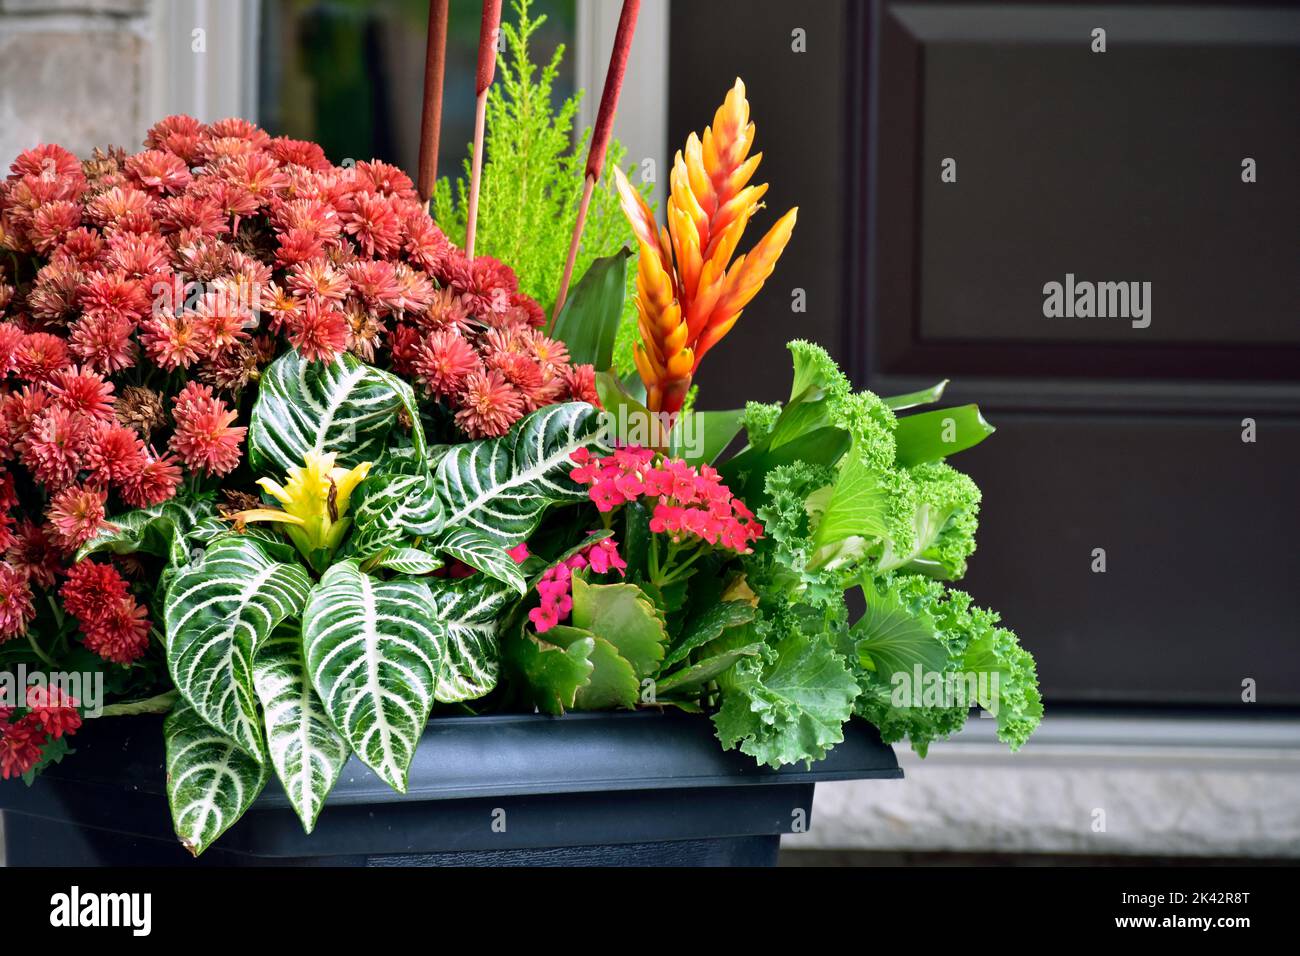 Thanksgiving colours and textures create a beautiful example of seasonal container gardening. Stock Photo